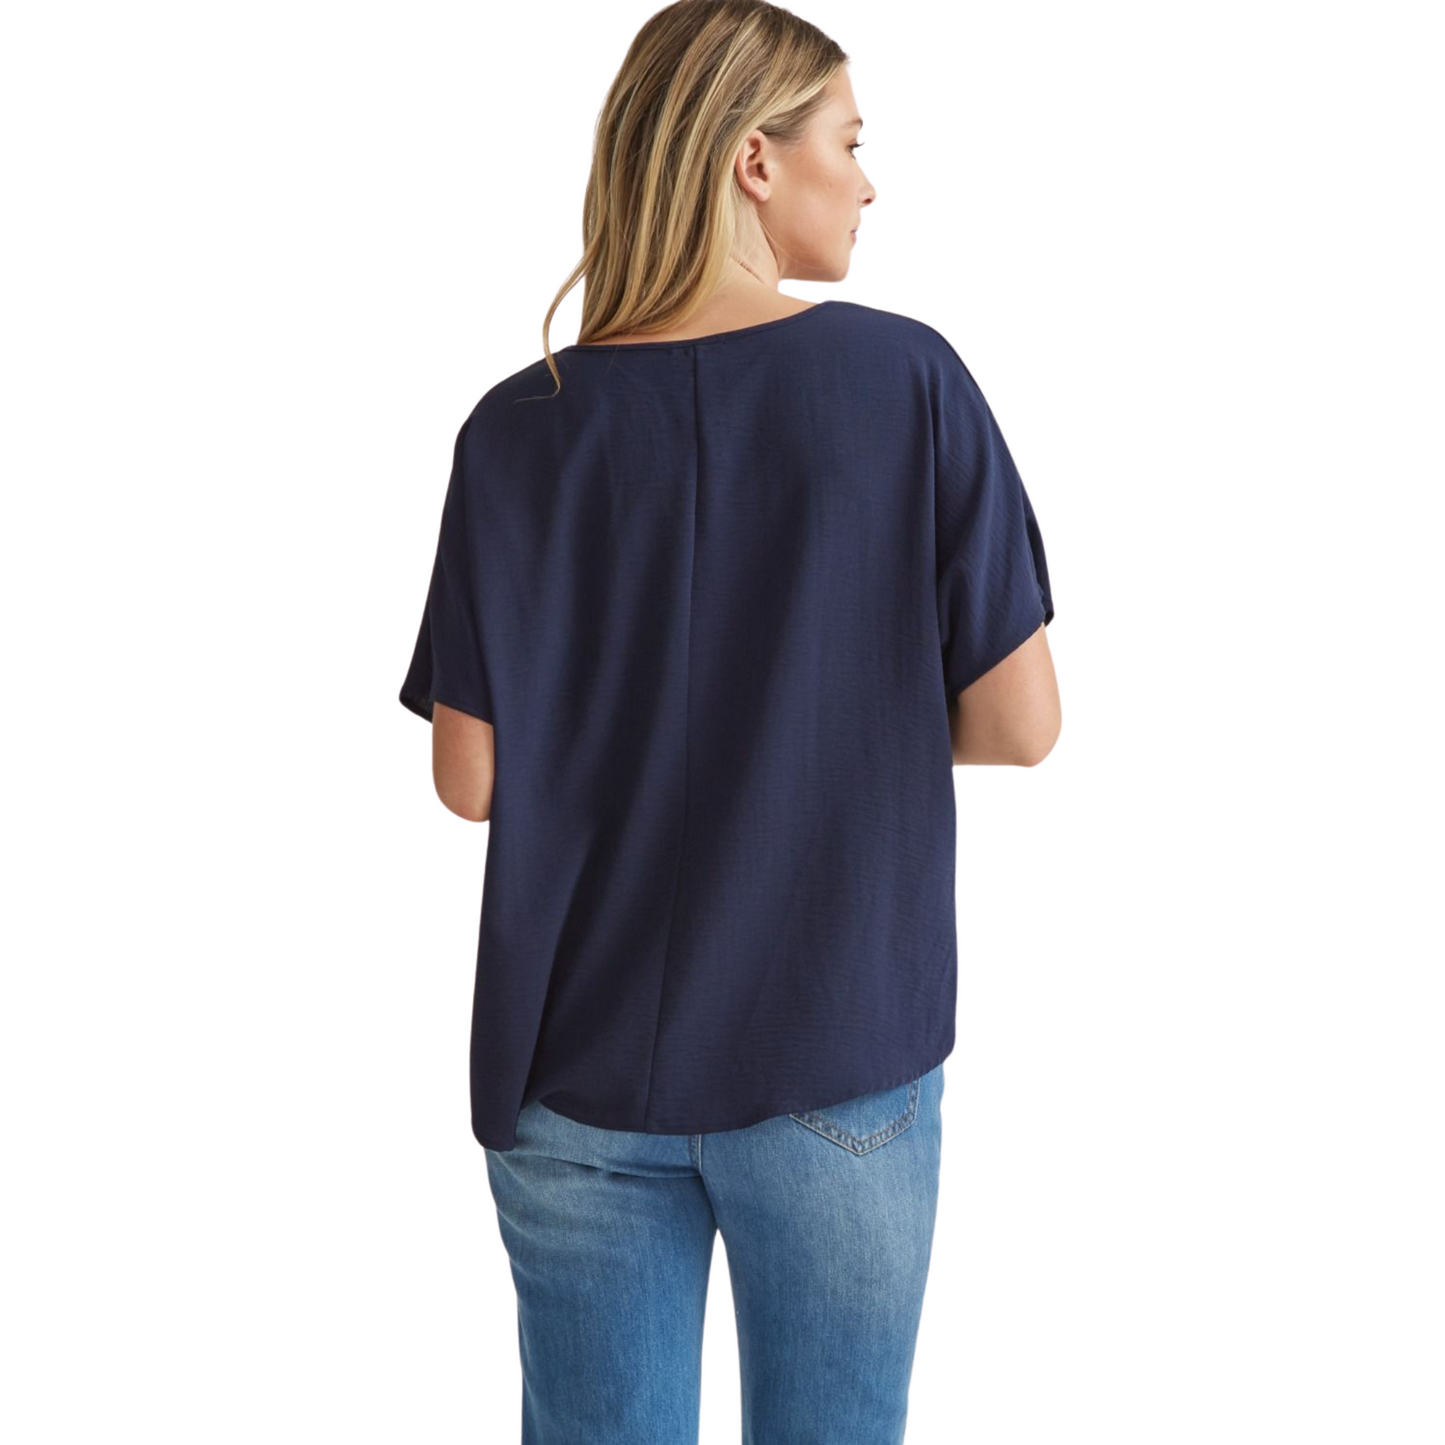 This navy solid v-neck top features an asymmetric rounded hem detail that adds a unique touch to any outfit. Made with lightweight, semi-sheer woven fabric, this top is perfect for all-day wear. Look effortlessly stylish and feel comfortable at the same time.